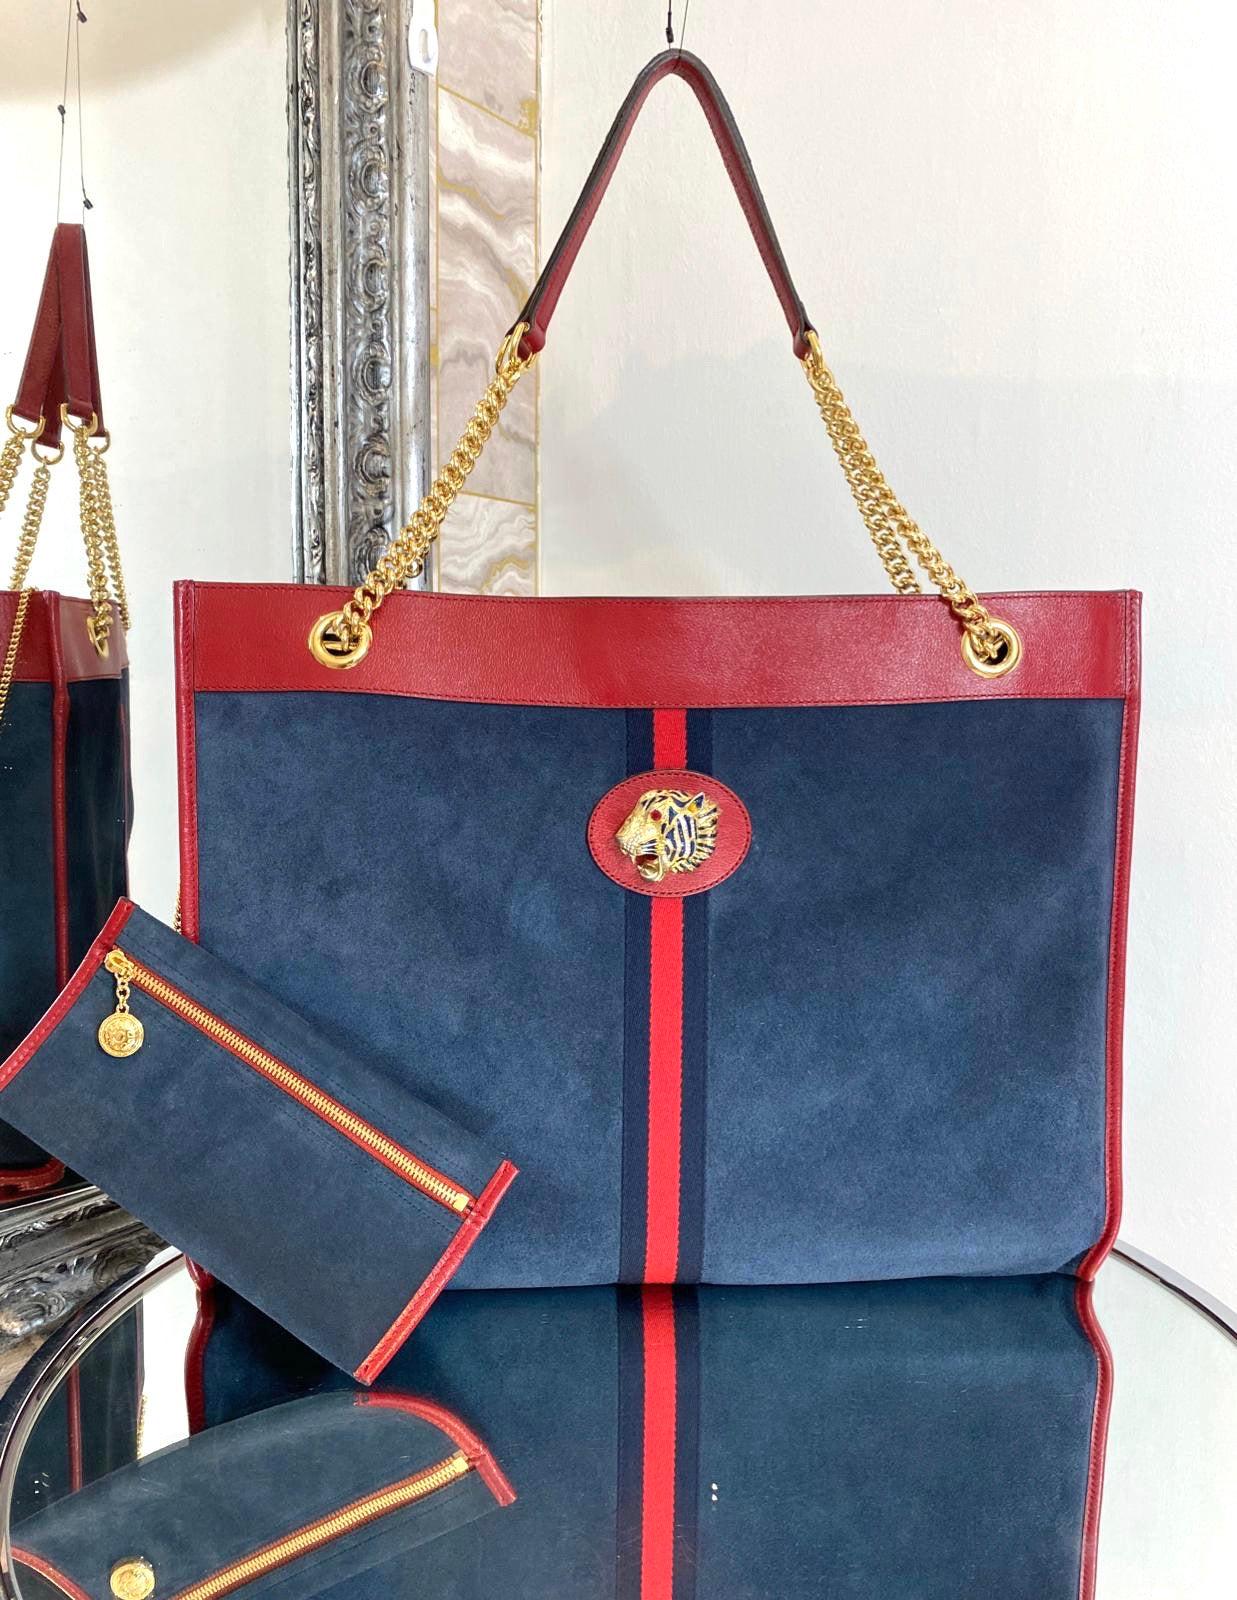 Gucci Suede Rajah Large Shopper Bag

Dark blue suede tote bag trimmed in red leather.  Enhanced by the blue and red Web inlaid onto the front. Bright red leather trim and shiny gold hardware. Stunning jewelled enamelled tiger head with crystals.